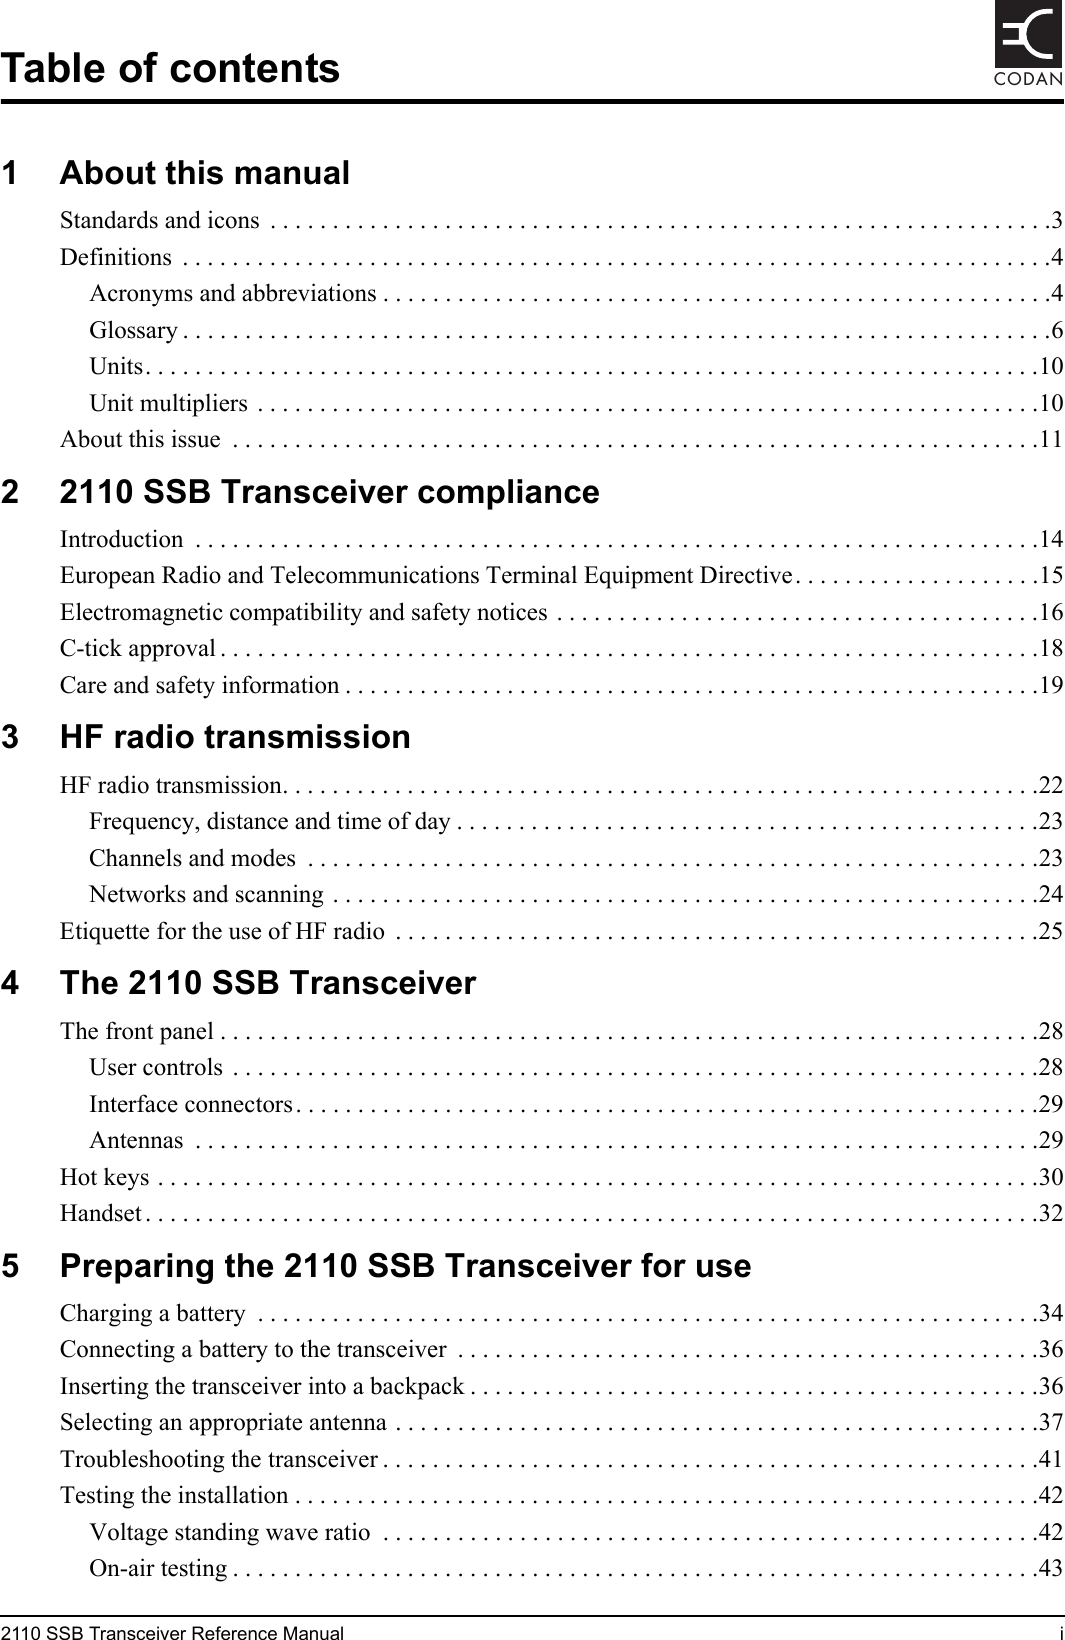 2110 SSB Transceiver Reference Manual iCODANTable of contents1 About this manualStandards and icons  . . . . . . . . . . . . . . . . . . . . . . . . . . . . . . . . . . . . . . . . . . . . . . . . . . . . . . . . . . . . . . .3Definitions  . . . . . . . . . . . . . . . . . . . . . . . . . . . . . . . . . . . . . . . . . . . . . . . . . . . . . . . . . . . . . . . . . . . . . .4Acronyms and abbreviations . . . . . . . . . . . . . . . . . . . . . . . . . . . . . . . . . . . . . . . . . . . . . . . . . . . . . .4Glossary . . . . . . . . . . . . . . . . . . . . . . . . . . . . . . . . . . . . . . . . . . . . . . . . . . . . . . . . . . . . . . . . . . . . . .6Units. . . . . . . . . . . . . . . . . . . . . . . . . . . . . . . . . . . . . . . . . . . . . . . . . . . . . . . . . . . . . . . . . . . . . . . .10Unit multipliers . . . . . . . . . . . . . . . . . . . . . . . . . . . . . . . . . . . . . . . . . . . . . . . . . . . . . . . . . . . . . . .10About this issue  . . . . . . . . . . . . . . . . . . . . . . . . . . . . . . . . . . . . . . . . . . . . . . . . . . . . . . . . . . . . . . . . .112 2110 SSB Transceiver complianceIntroduction  . . . . . . . . . . . . . . . . . . . . . . . . . . . . . . . . . . . . . . . . . . . . . . . . . . . . . . . . . . . . . . . . . . . .14European Radio and Telecommunications Terminal Equipment Directive. . . . . . . . . . . . . . . . . . . .15Electromagnetic compatibility and safety notices . . . . . . . . . . . . . . . . . . . . . . . . . . . . . . . . . . . . . . .16C-tick approval . . . . . . . . . . . . . . . . . . . . . . . . . . . . . . . . . . . . . . . . . . . . . . . . . . . . . . . . . . . . . . . . . .18Care and safety information . . . . . . . . . . . . . . . . . . . . . . . . . . . . . . . . . . . . . . . . . . . . . . . . . . . . . . . .193 HF radio transmissionHF radio transmission. . . . . . . . . . . . . . . . . . . . . . . . . . . . . . . . . . . . . . . . . . . . . . . . . . . . . . . . . . . . .22Frequency, distance and time of day . . . . . . . . . . . . . . . . . . . . . . . . . . . . . . . . . . . . . . . . . . . . . . .23Channels and modes  . . . . . . . . . . . . . . . . . . . . . . . . . . . . . . . . . . . . . . . . . . . . . . . . . . . . . . . . . . .23Networks and scanning . . . . . . . . . . . . . . . . . . . . . . . . . . . . . . . . . . . . . . . . . . . . . . . . . . . . . . . . .24Etiquette for the use of HF radio  . . . . . . . . . . . . . . . . . . . . . . . . . . . . . . . . . . . . . . . . . . . . . . . . . . . .254 The 2110 SSB TransceiverThe front panel . . . . . . . . . . . . . . . . . . . . . . . . . . . . . . . . . . . . . . . . . . . . . . . . . . . . . . . . . . . . . . . . . .28User controls  . . . . . . . . . . . . . . . . . . . . . . . . . . . . . . . . . . . . . . . . . . . . . . . . . . . . . . . . . . . . . . . . .28Interface connectors. . . . . . . . . . . . . . . . . . . . . . . . . . . . . . . . . . . . . . . . . . . . . . . . . . . . . . . . . . . .29Antennas  . . . . . . . . . . . . . . . . . . . . . . . . . . . . . . . . . . . . . . . . . . . . . . . . . . . . . . . . . . . . . . . . . . . .29Hot keys . . . . . . . . . . . . . . . . . . . . . . . . . . . . . . . . . . . . . . . . . . . . . . . . . . . . . . . . . . . . . . . . . . . . . . .30Handset . . . . . . . . . . . . . . . . . . . . . . . . . . . . . . . . . . . . . . . . . . . . . . . . . . . . . . . . . . . . . . . . . . . . . . . .325 Preparing the 2110 SSB Transceiver for useCharging a battery  . . . . . . . . . . . . . . . . . . . . . . . . . . . . . . . . . . . . . . . . . . . . . . . . . . . . . . . . . . . . . . .34Connecting a battery to the transceiver  . . . . . . . . . . . . . . . . . . . . . . . . . . . . . . . . . . . . . . . . . . . . . . .36Inserting the transceiver into a backpack . . . . . . . . . . . . . . . . . . . . . . . . . . . . . . . . . . . . . . . . . . . . . .36Selecting an appropriate antenna . . . . . . . . . . . . . . . . . . . . . . . . . . . . . . . . . . . . . . . . . . . . . . . . . . . .37Troubleshooting the transceiver . . . . . . . . . . . . . . . . . . . . . . . . . . . . . . . . . . . . . . . . . . . . . . . . . . . . .41Testing the installation . . . . . . . . . . . . . . . . . . . . . . . . . . . . . . . . . . . . . . . . . . . . . . . . . . . . . . . . . . . .42Voltage standing wave ratio  . . . . . . . . . . . . . . . . . . . . . . . . . . . . . . . . . . . . . . . . . . . . . . . . . . . . .42On-air testing . . . . . . . . . . . . . . . . . . . . . . . . . . . . . . . . . . . . . . . . . . . . . . . . . . . . . . . . . . . . . . . . .43